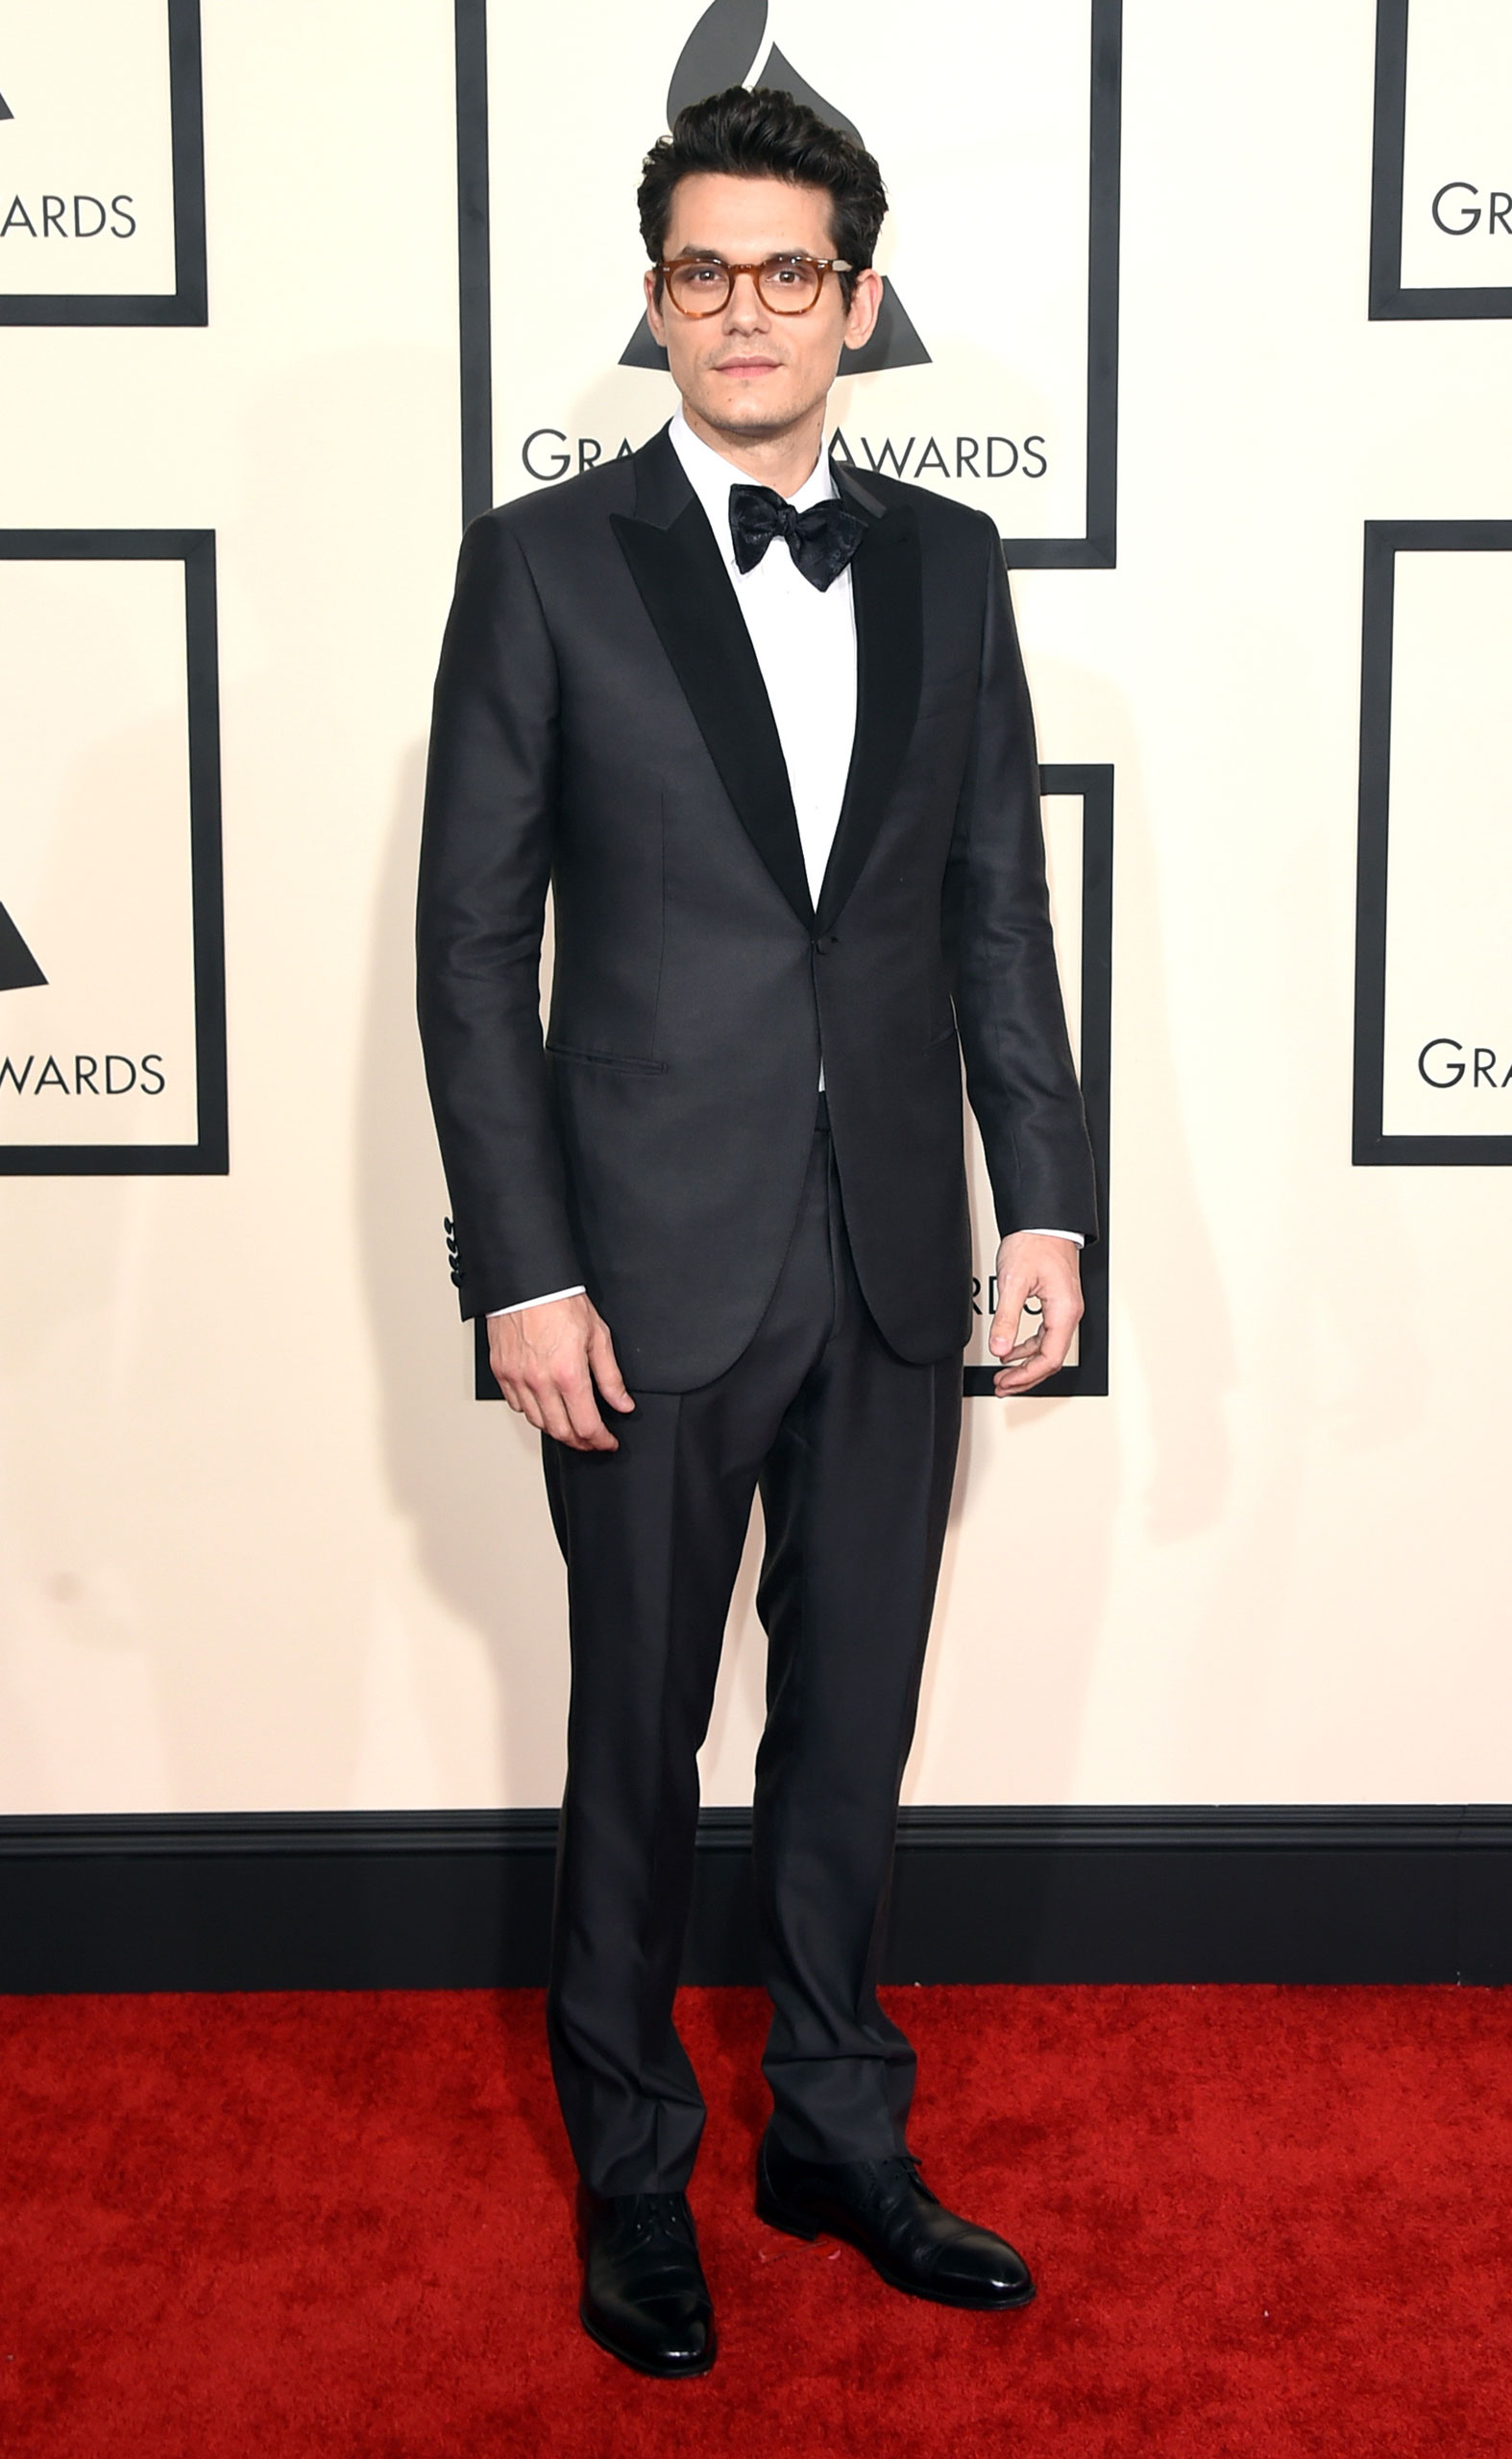 John Mayer attends the 57th Annual Grammy Awards at the Staples Center on Feb. 8, 2015 in Los Angeles, Calif.